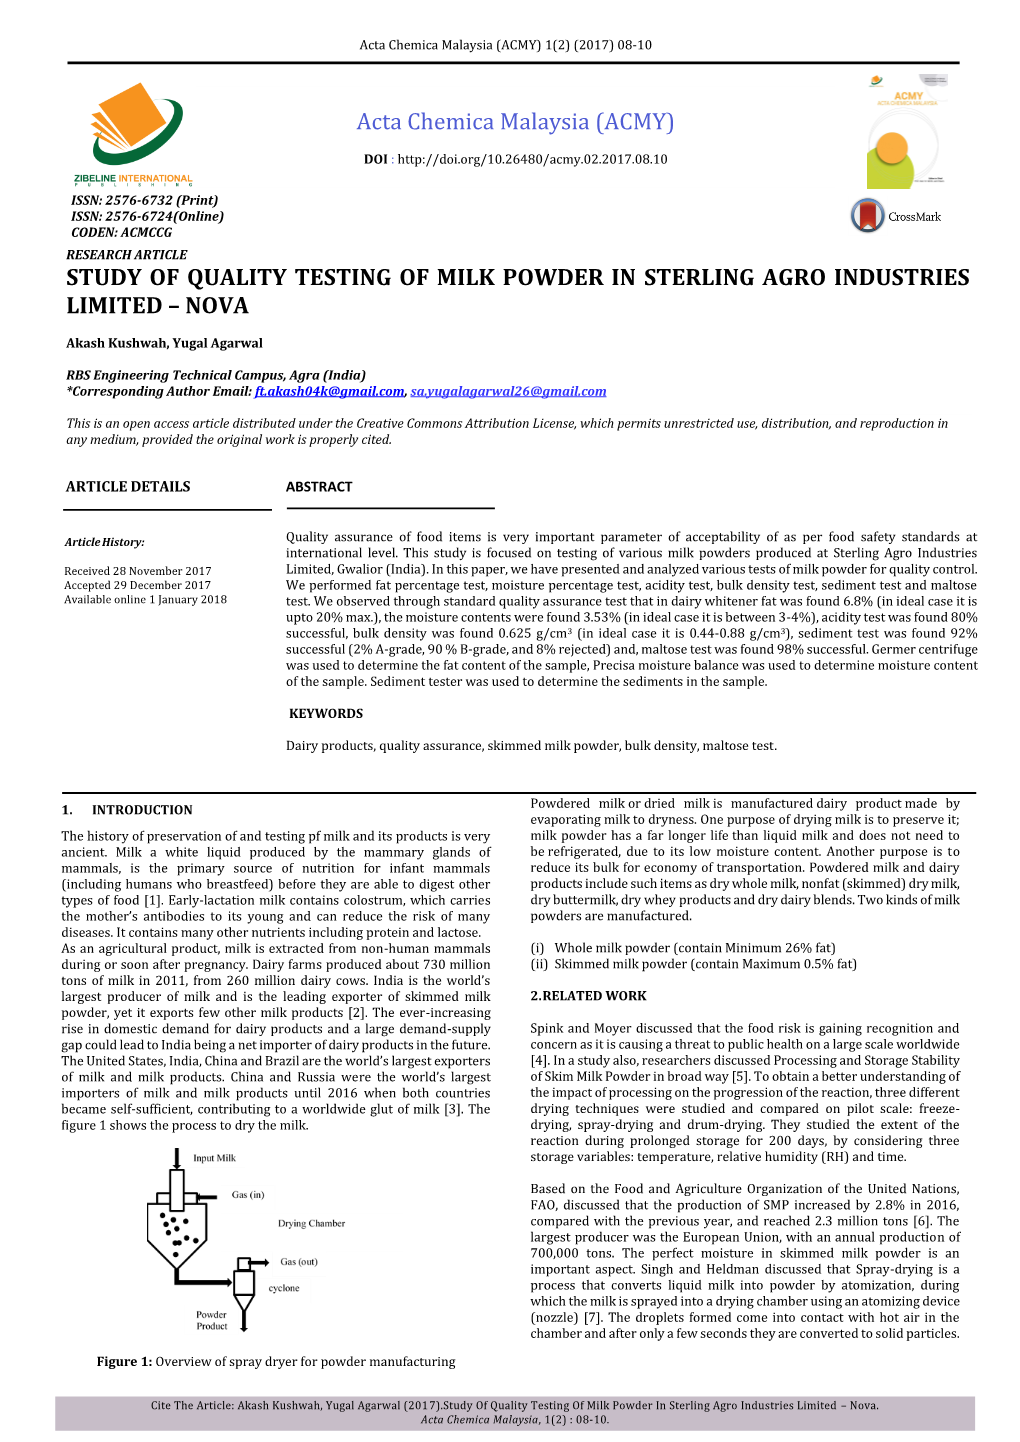 Acta Chemica Malaysia (ACMY) STUDY of QUALITY TESTING of MILK POWDER in STERLING AGRO INDUSTRIES LIMITED – NOVA